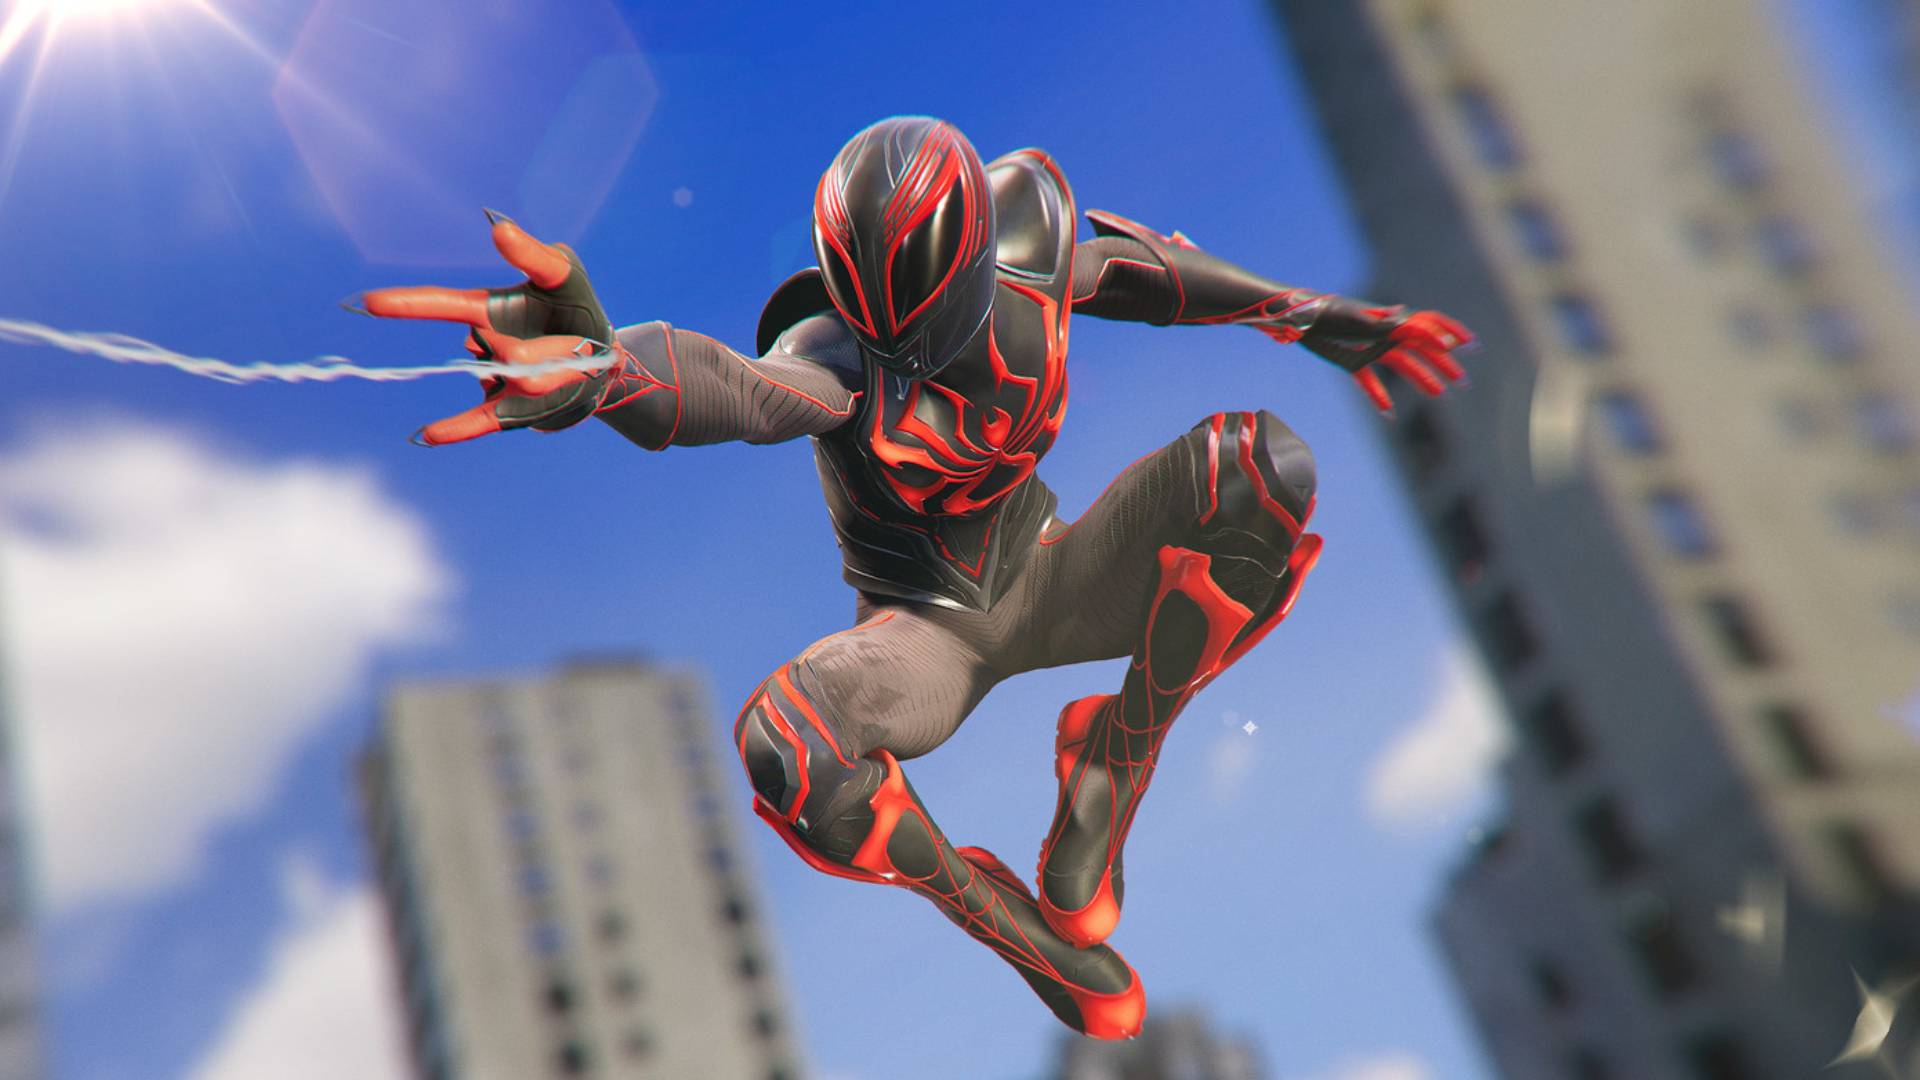 The Tokusatsu Suit for Miles in Marvel's Spider-Man 2